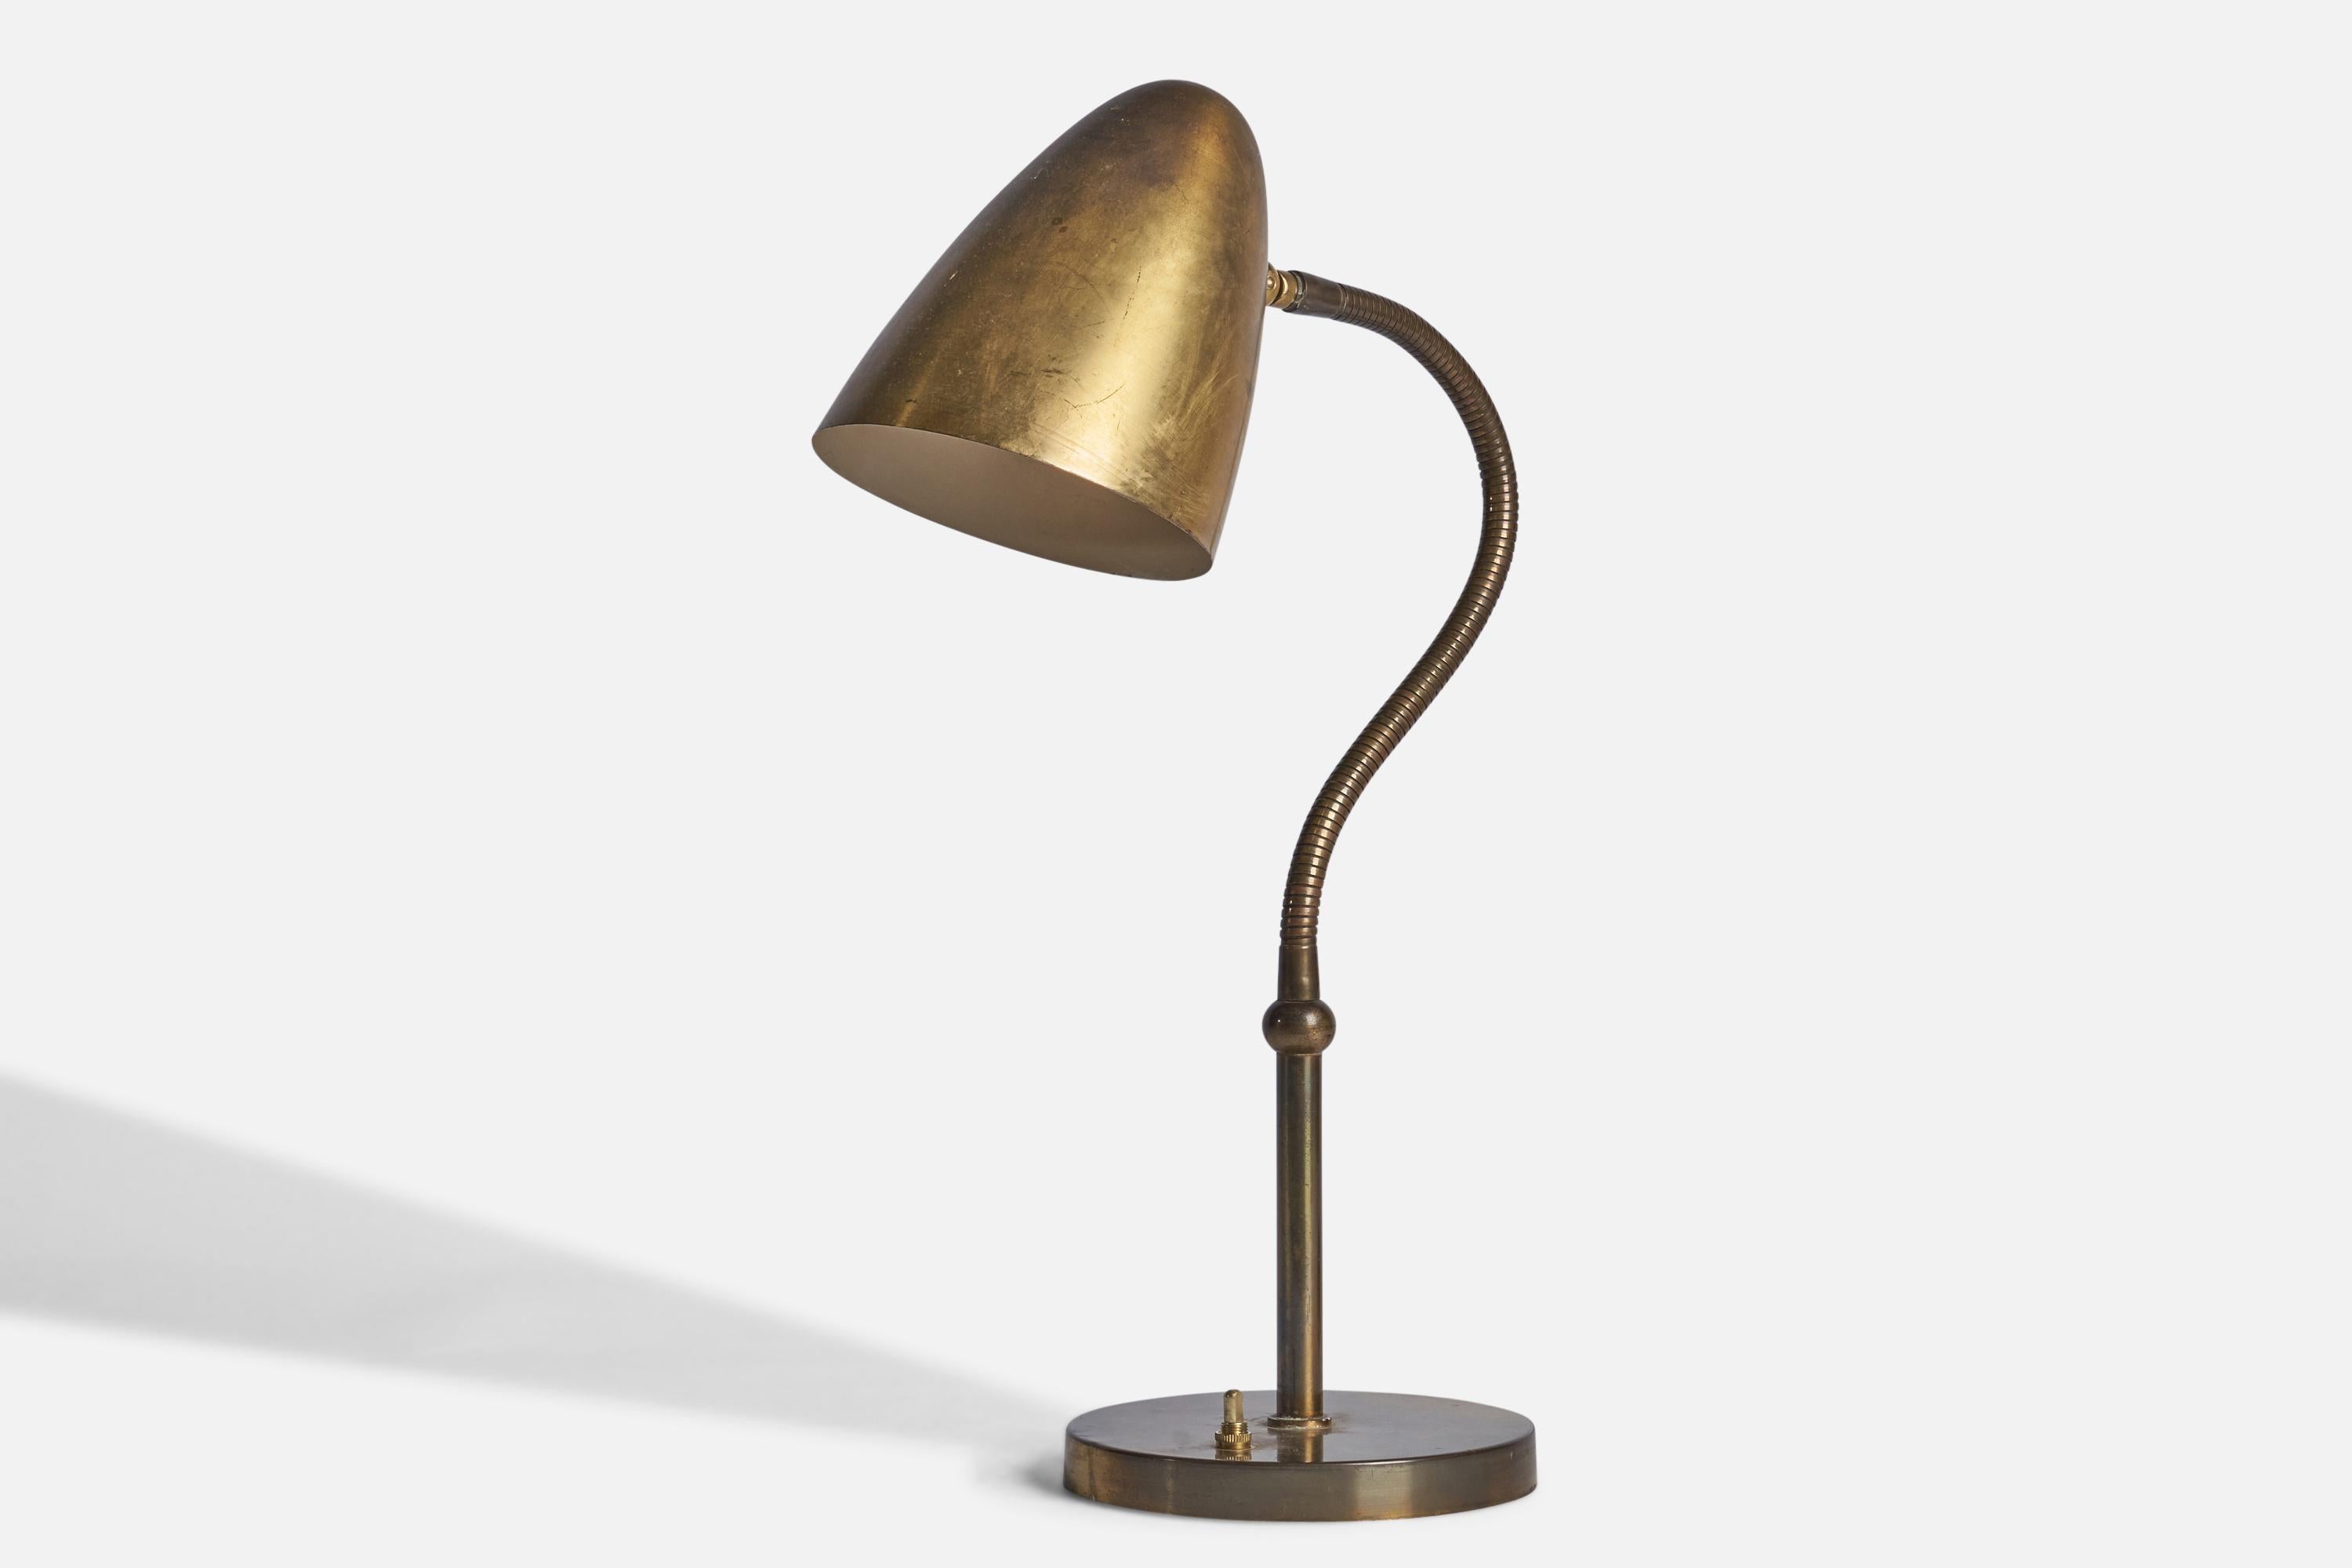 
An adjustable brass table lamp designed and produced in Denmark, 1930s.
Overall Dimensions (inches): 19” H x 6.25” W x 12” D
Dimensions variable based on position of light.
Bulb Specifications: E-26 Bulb
Number of Sockets: 1
All lighting will be